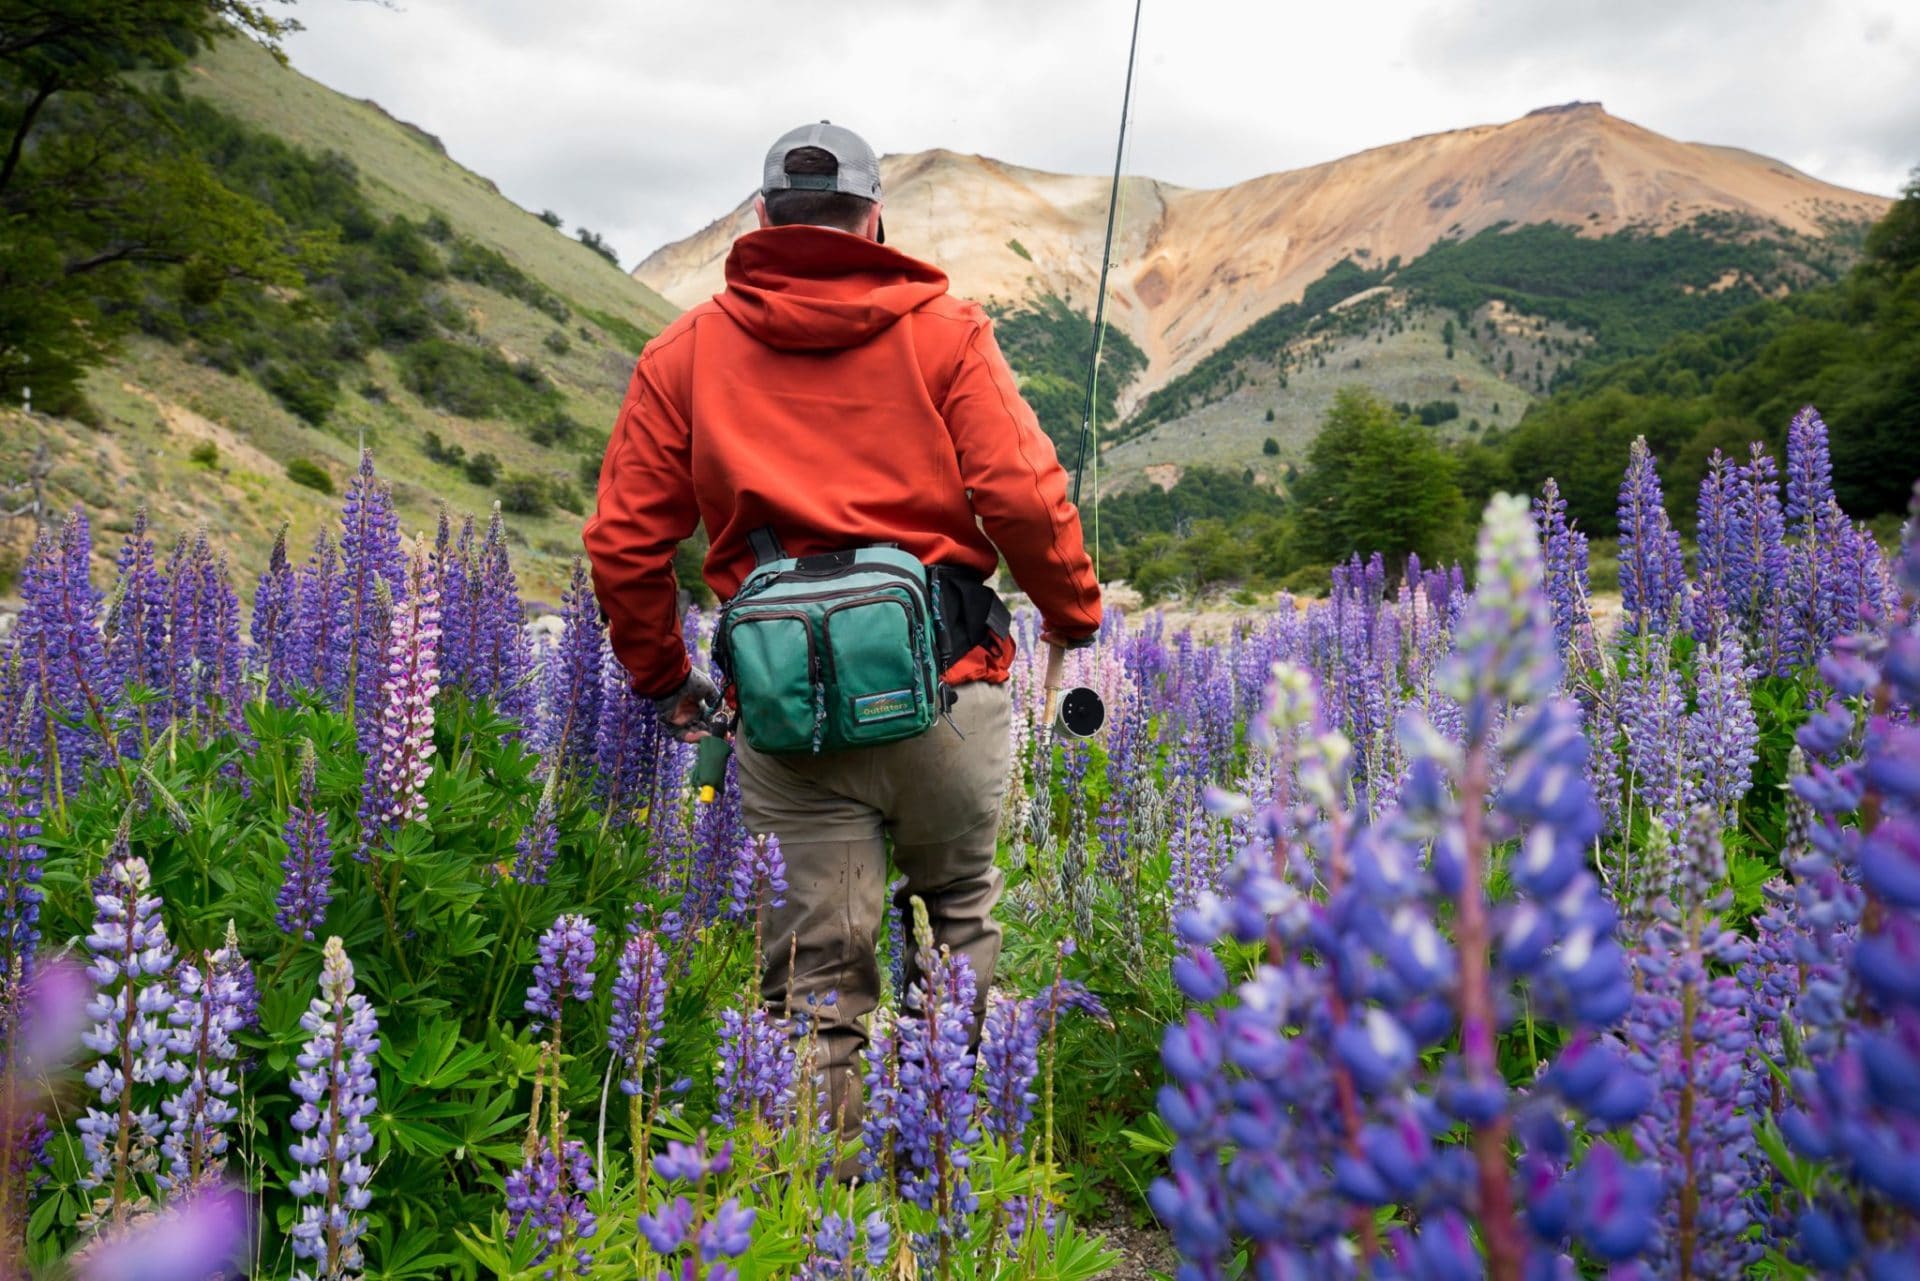 Patagonia – Hill's Dry Goods